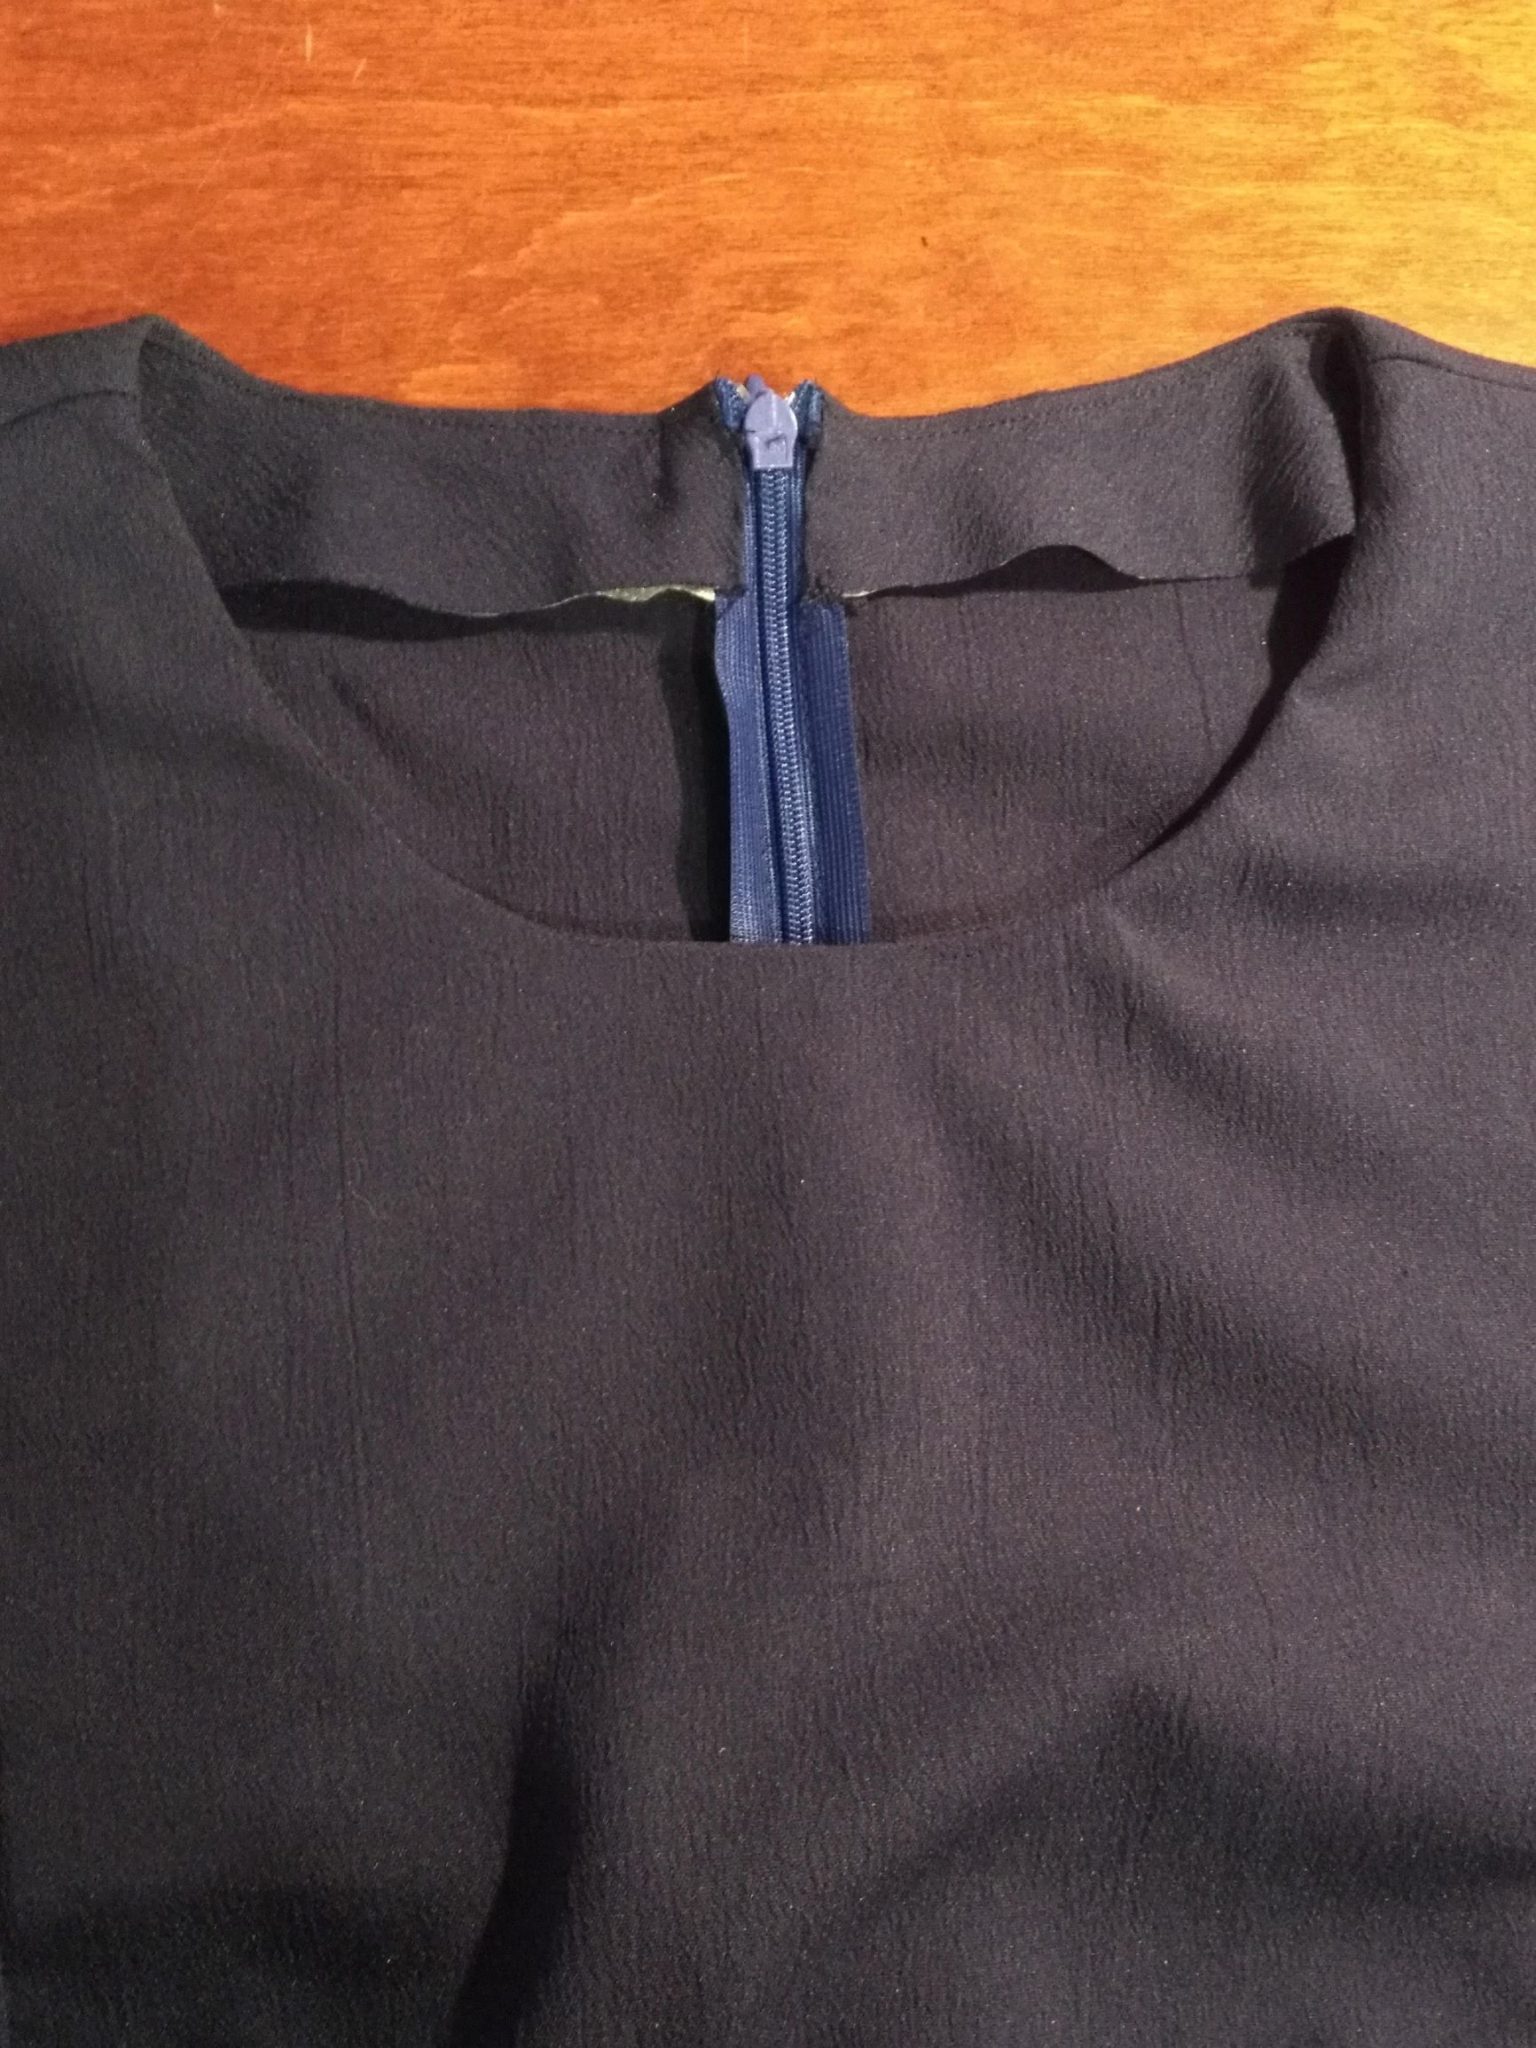 How to Draft and Sew a Neck Facing | Elise's Sewing Studio